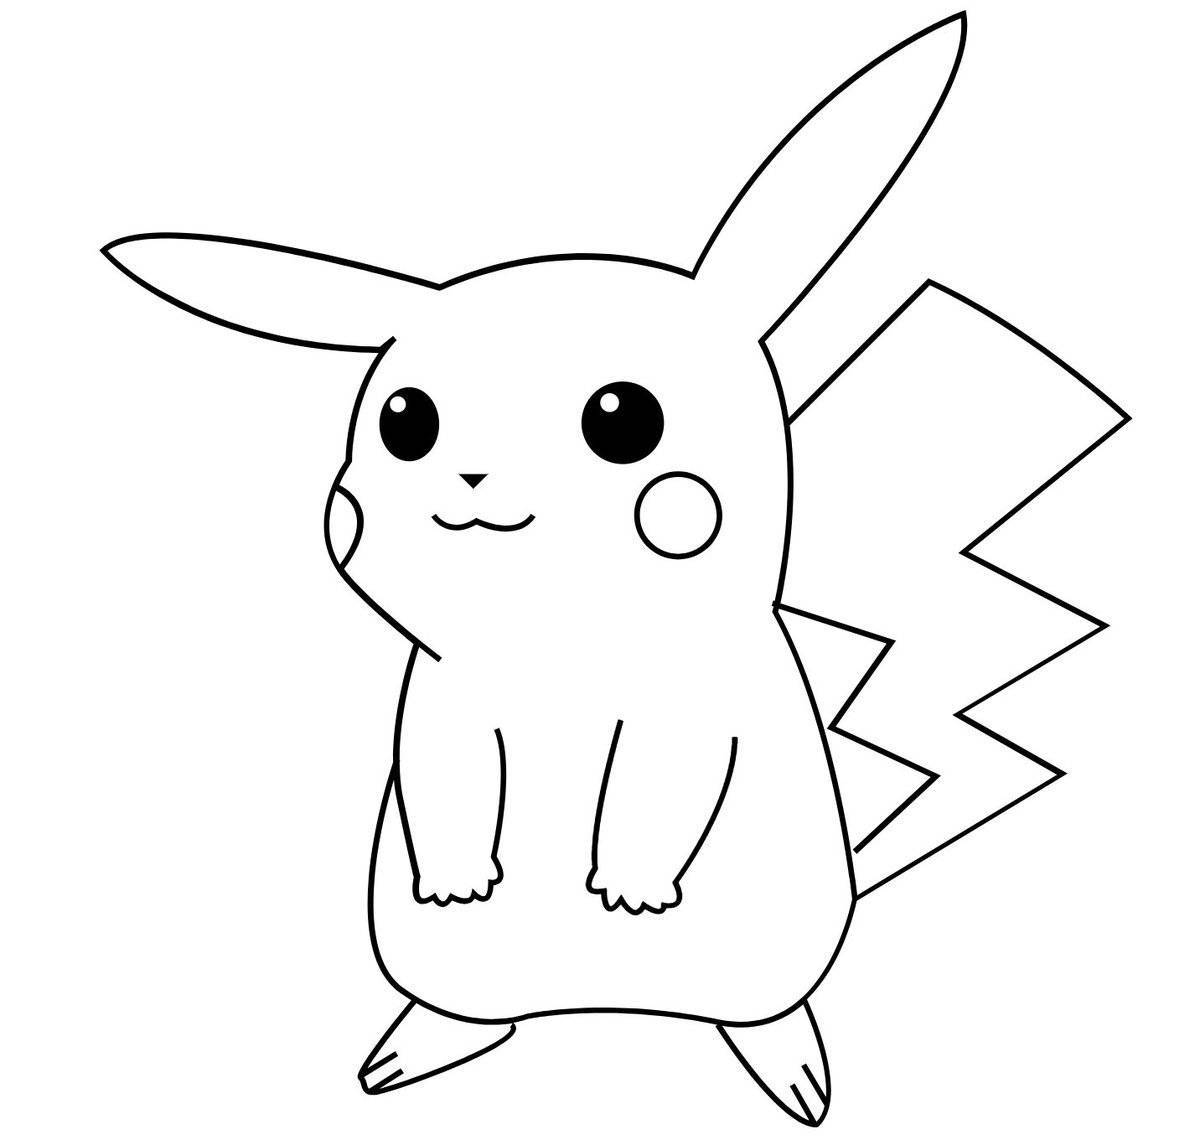 Spectacular New Year's Pikachu